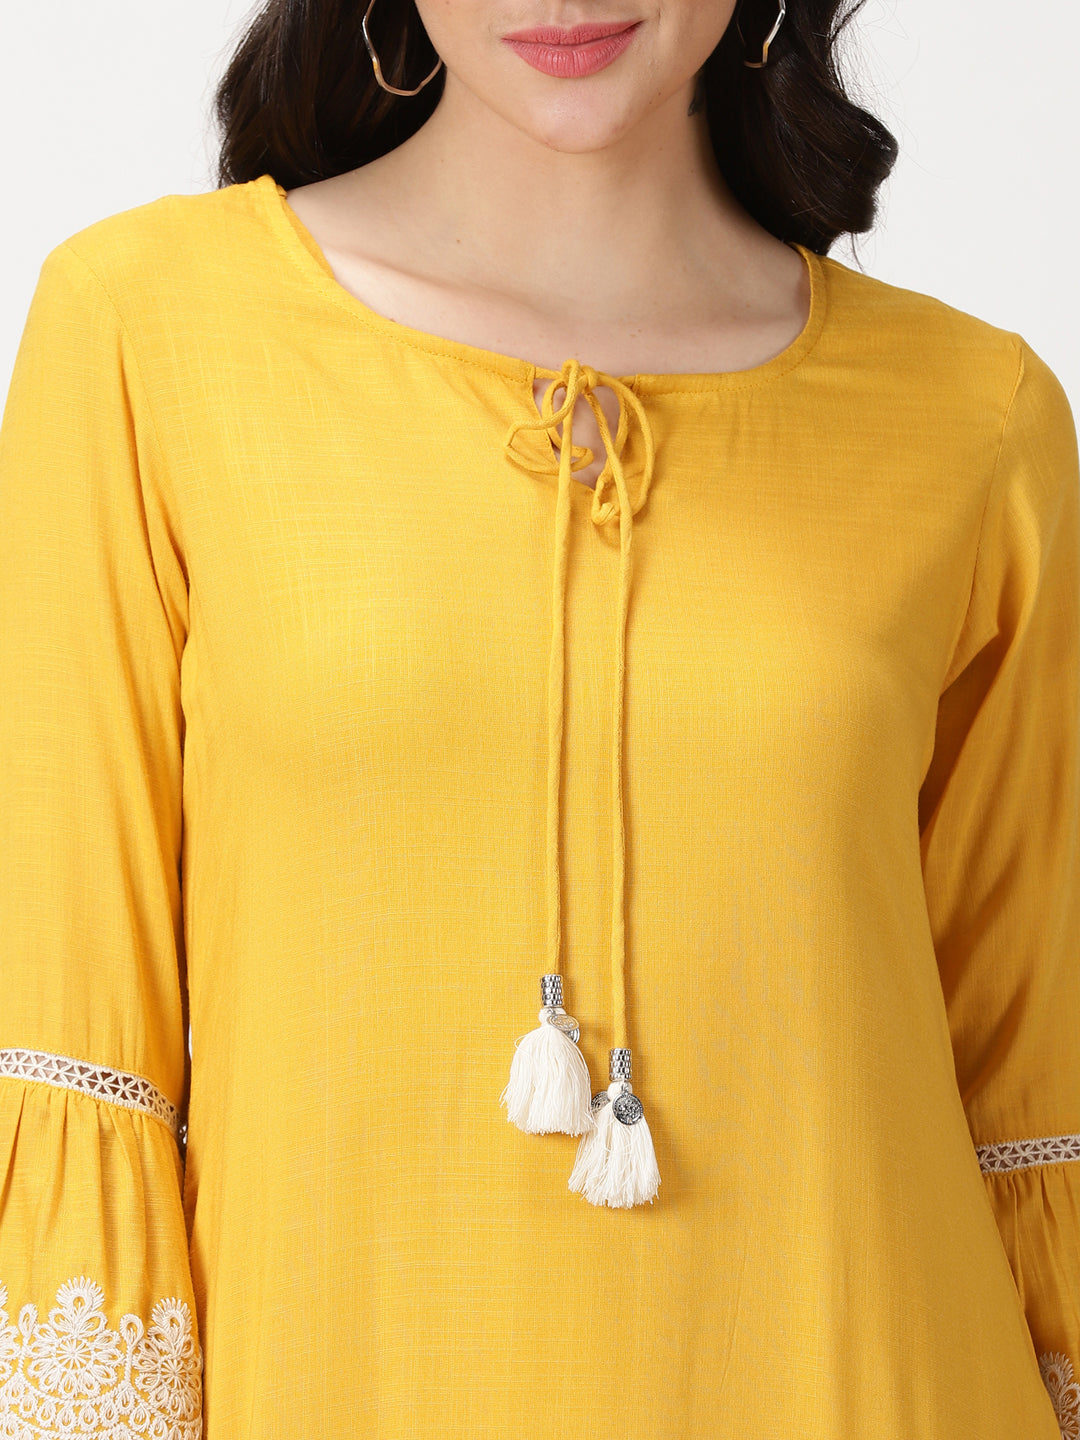 Yellow Solid Midi Dress with Lace Embroidered Details